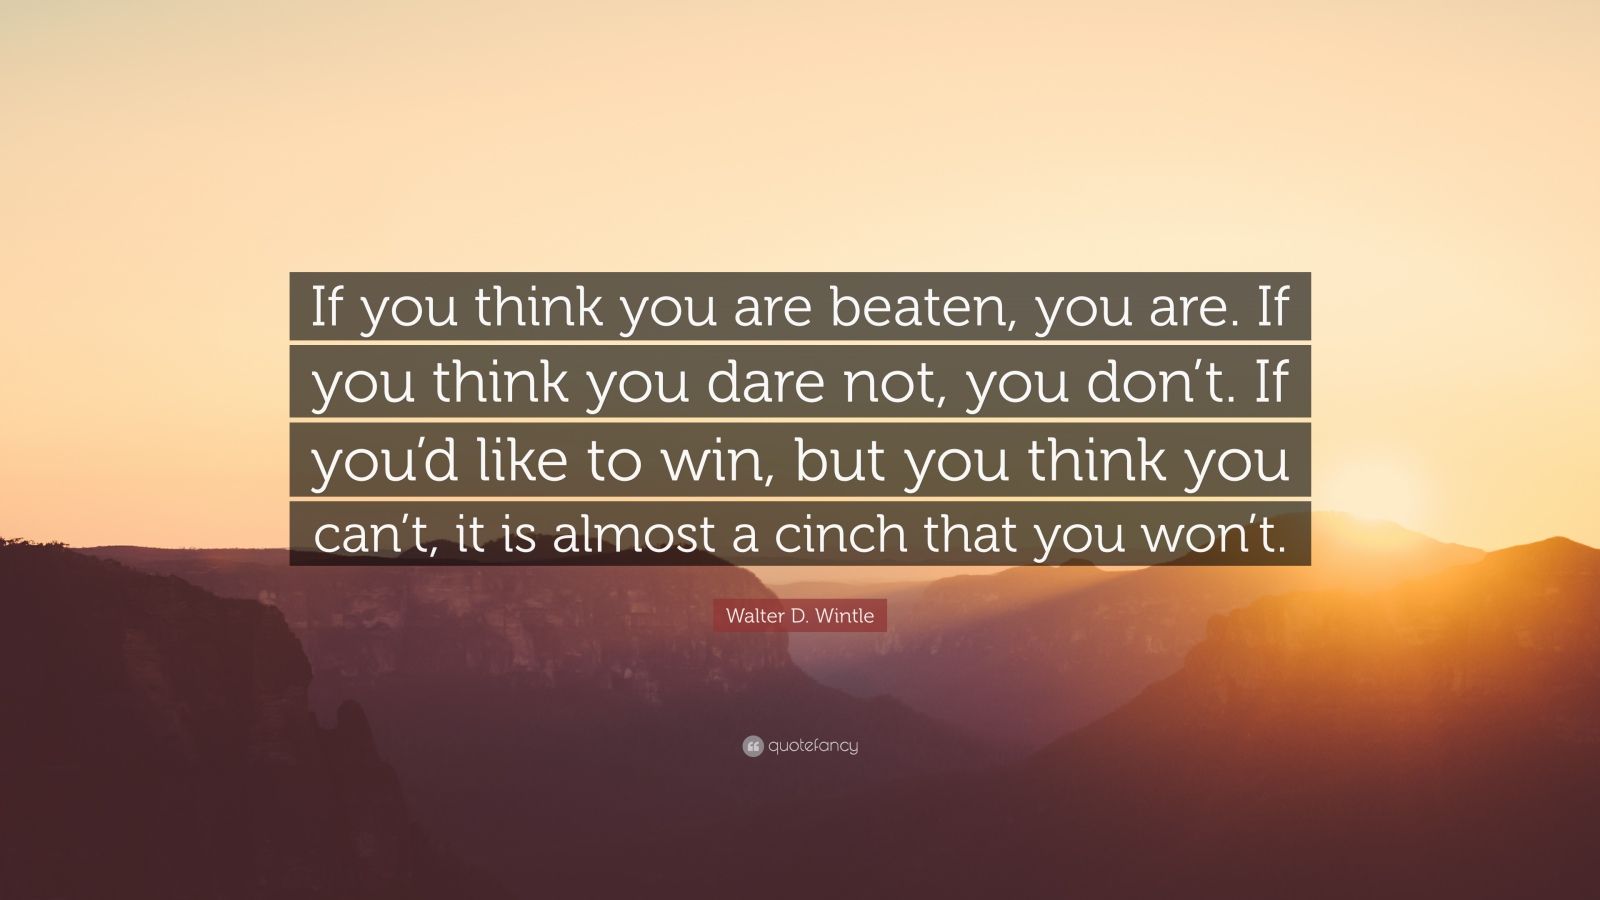 Walter D. Wintle Quote: “If you think you are beaten, you are. If you